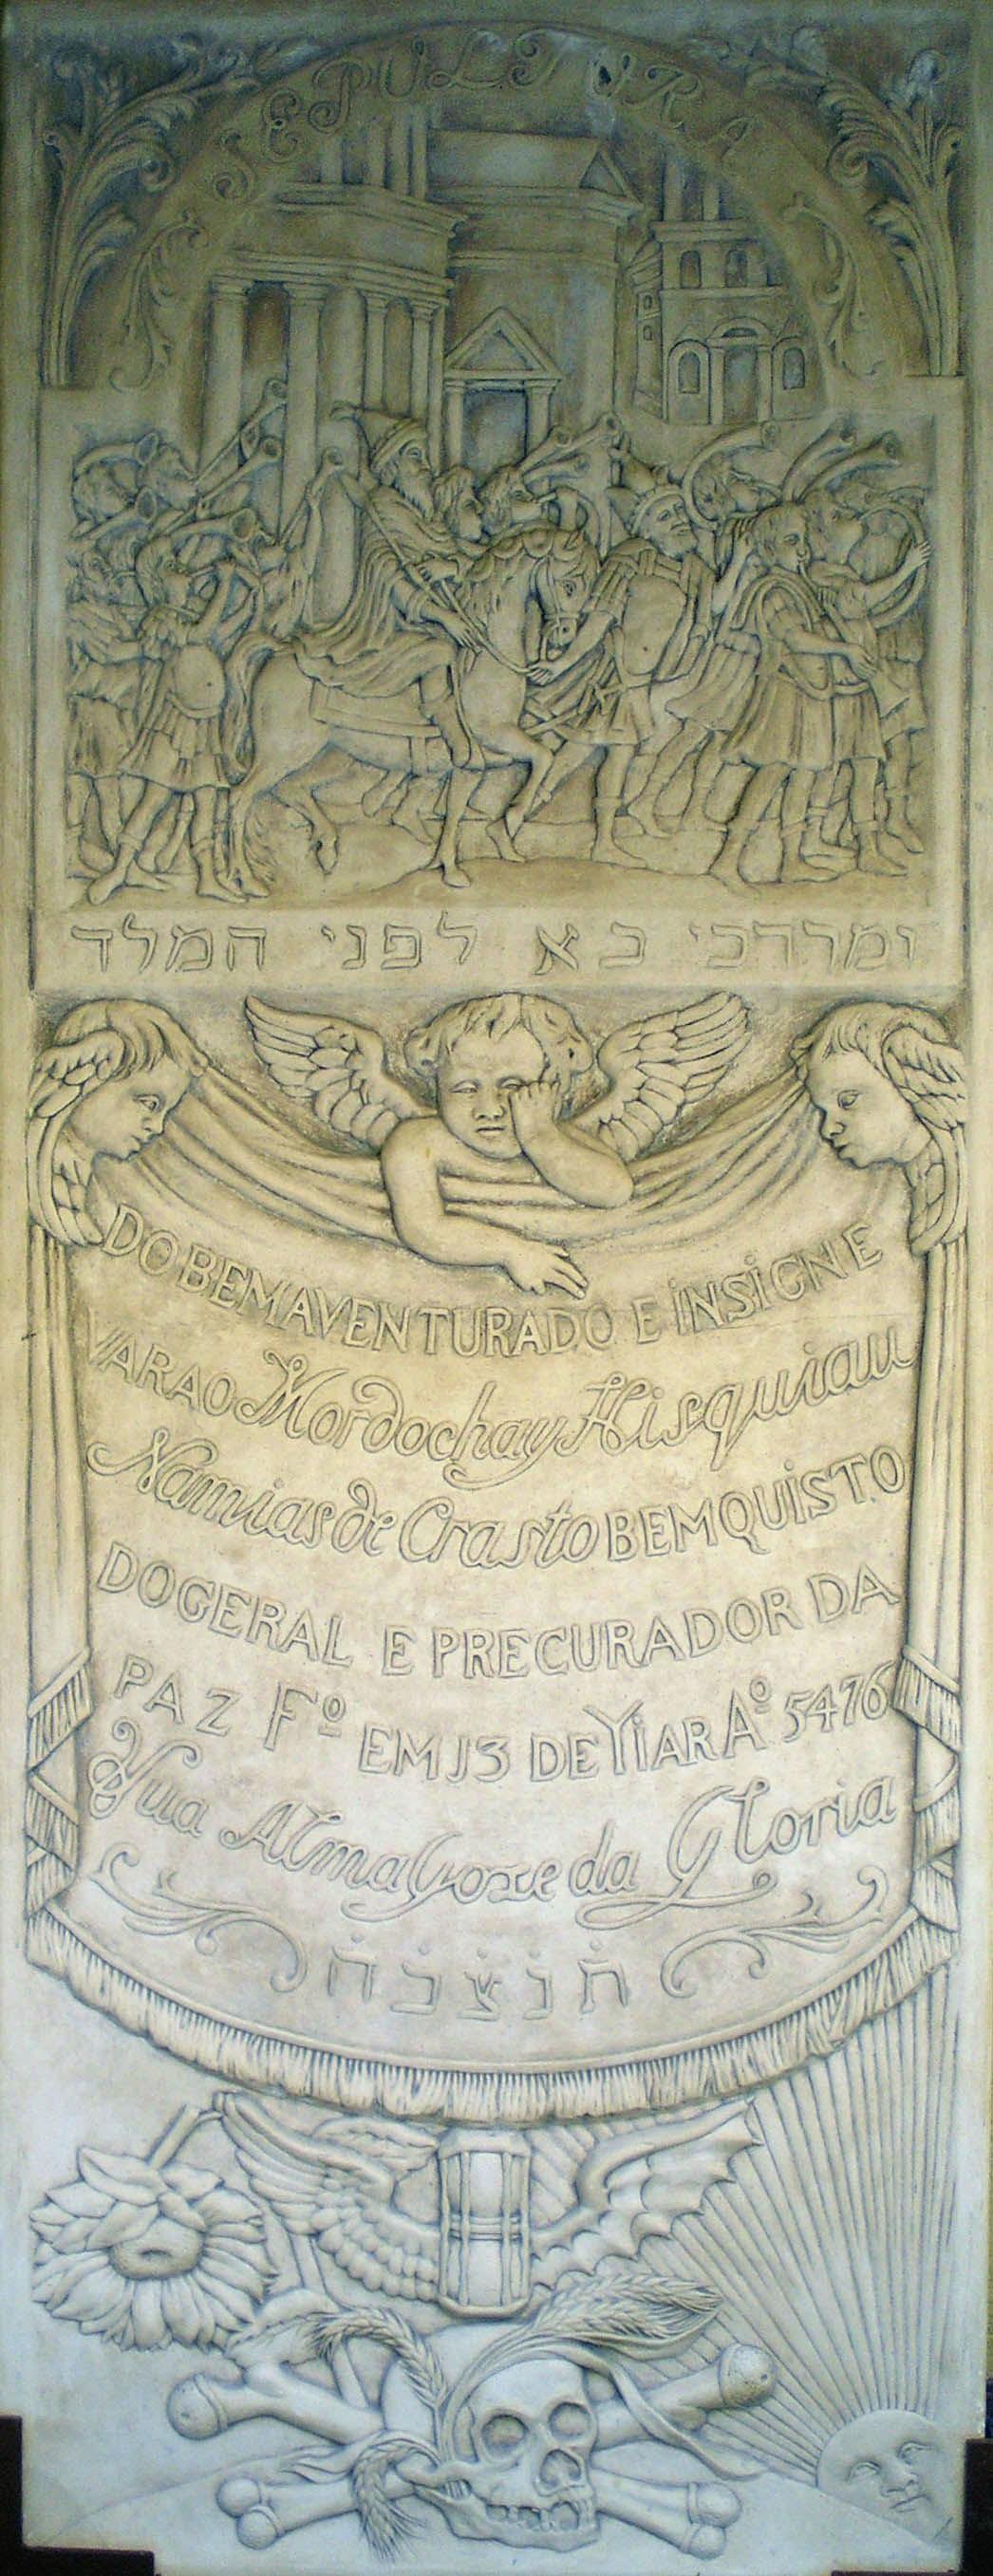 Tombstone of three cherubs and central Portuguese inscription, with engraving of wilted flower, skull, hourglass, and sun, with top panel of engraving of man riding in a procession through street and Hebrew text across the middle. 